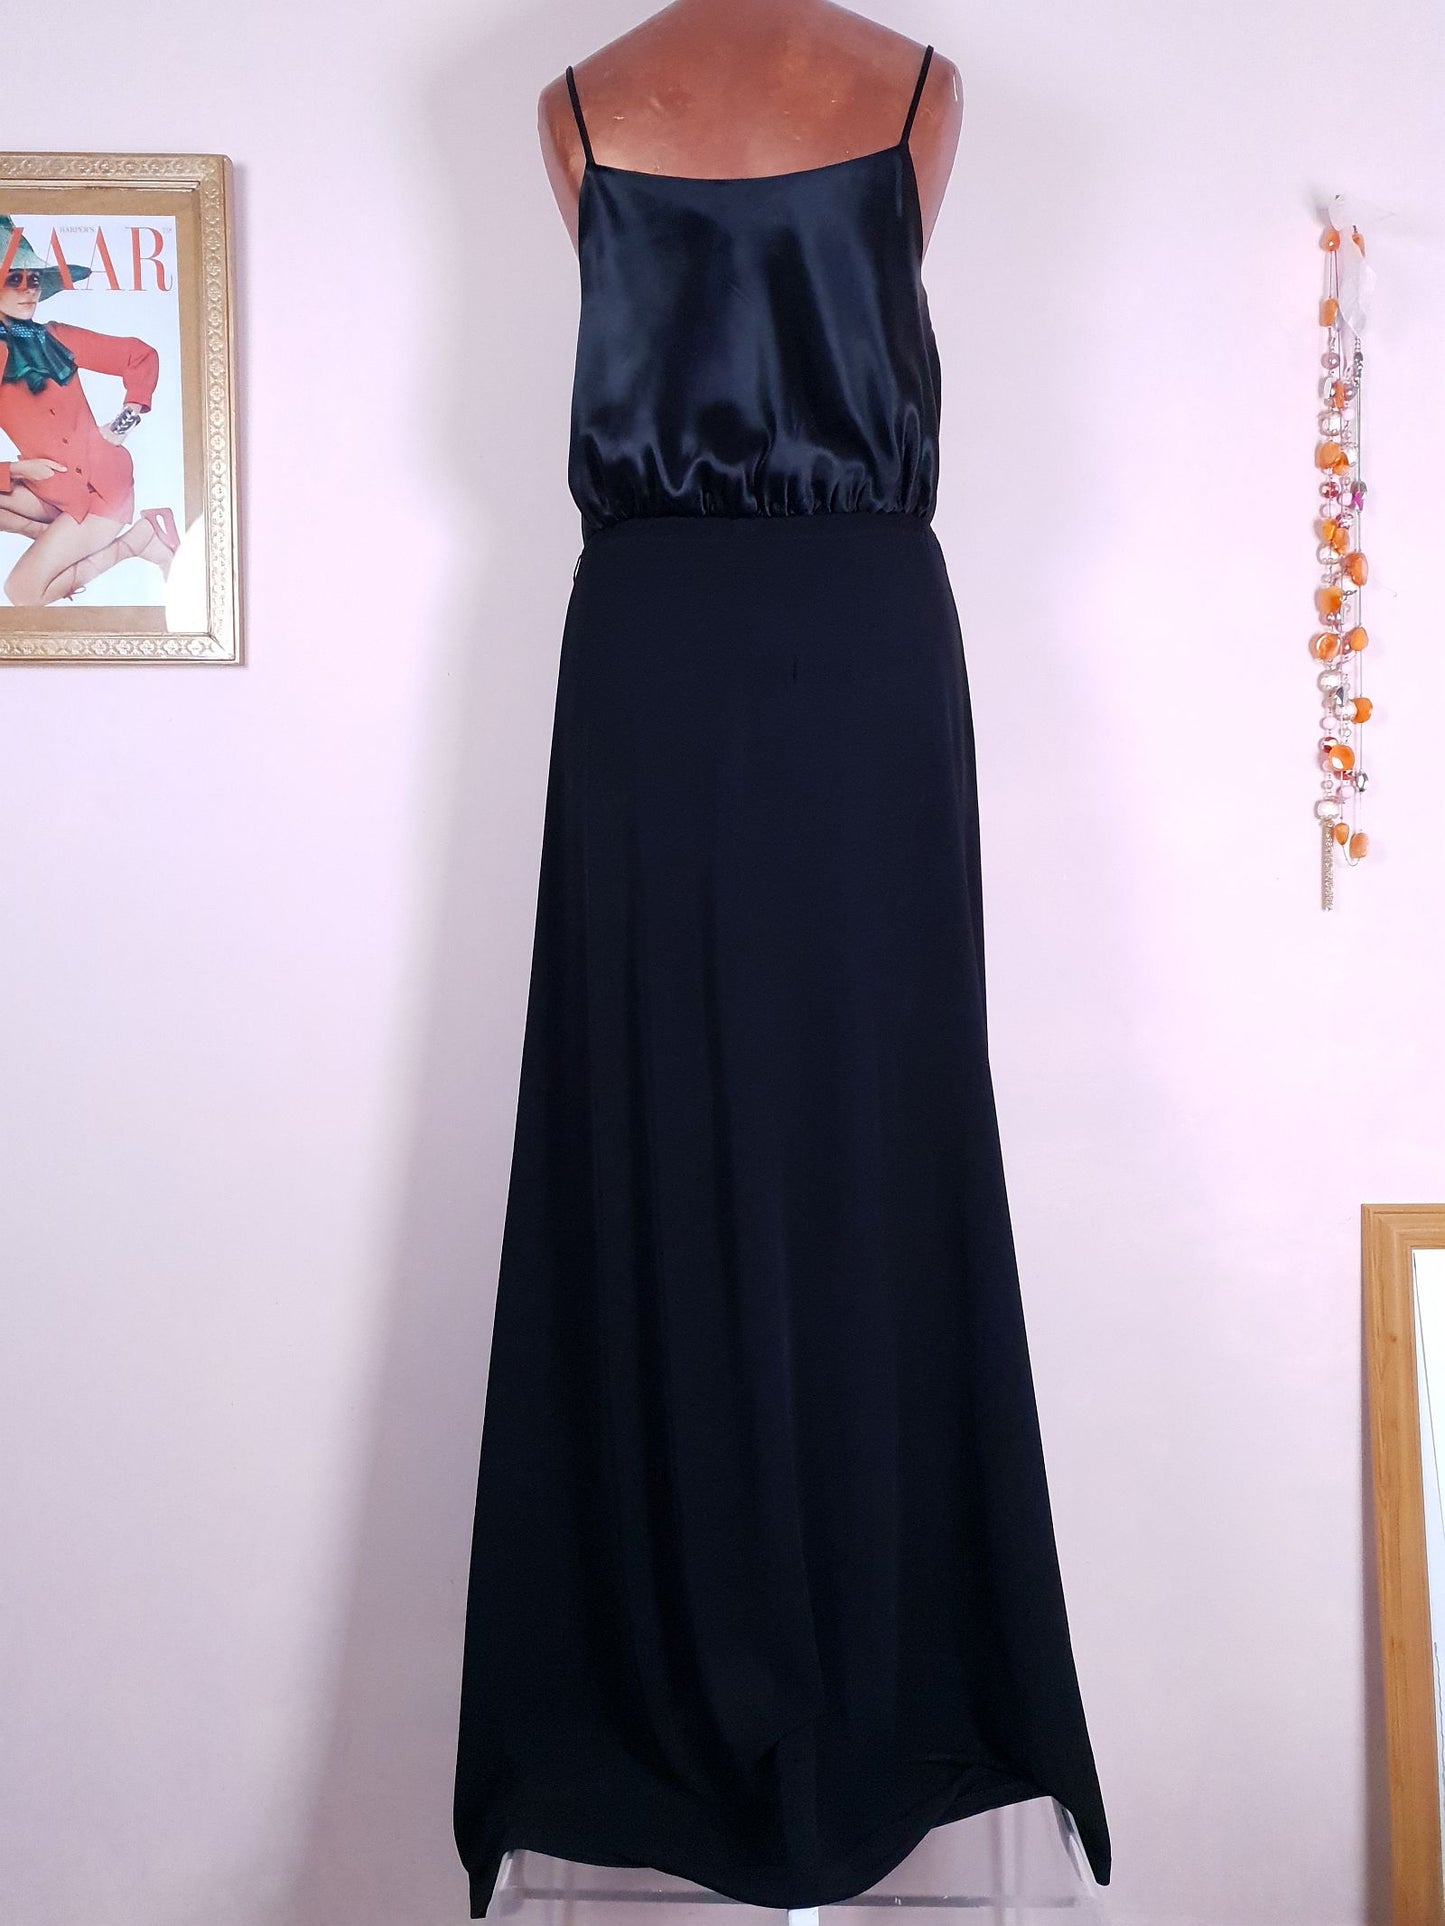 Black Silk Sequin Dress Evening Gown Maxi Party - Size 8